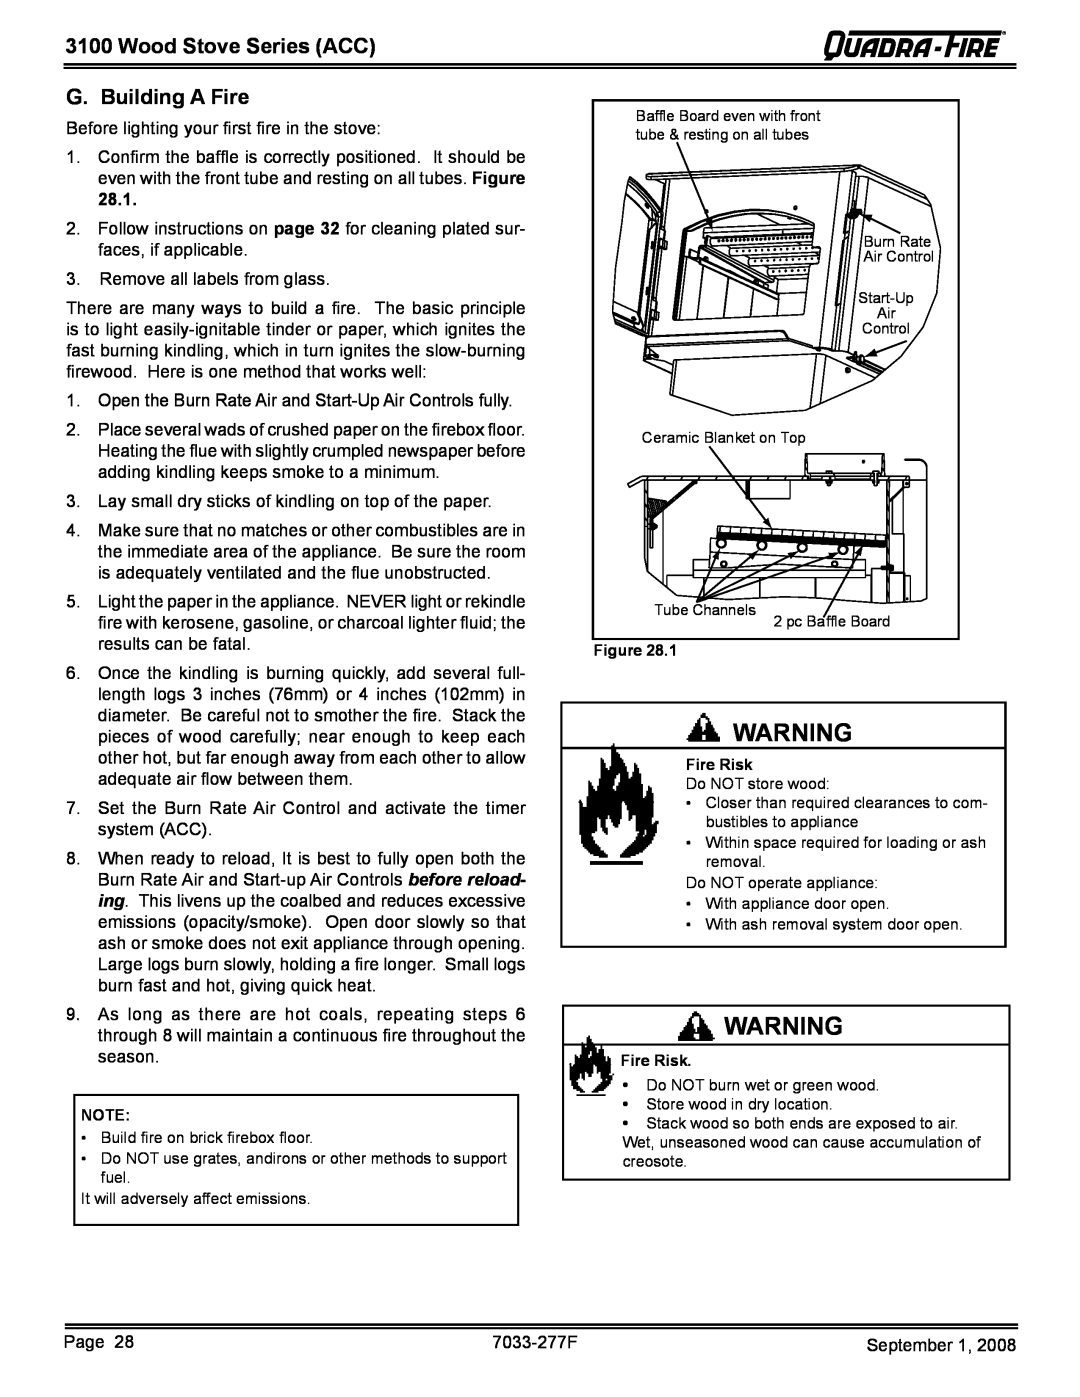 Hearth and Home Technologies 31ST-ACC, 31M-ACC-MBK owner manual G. Building A Fire, Wood Stove Series ACC 